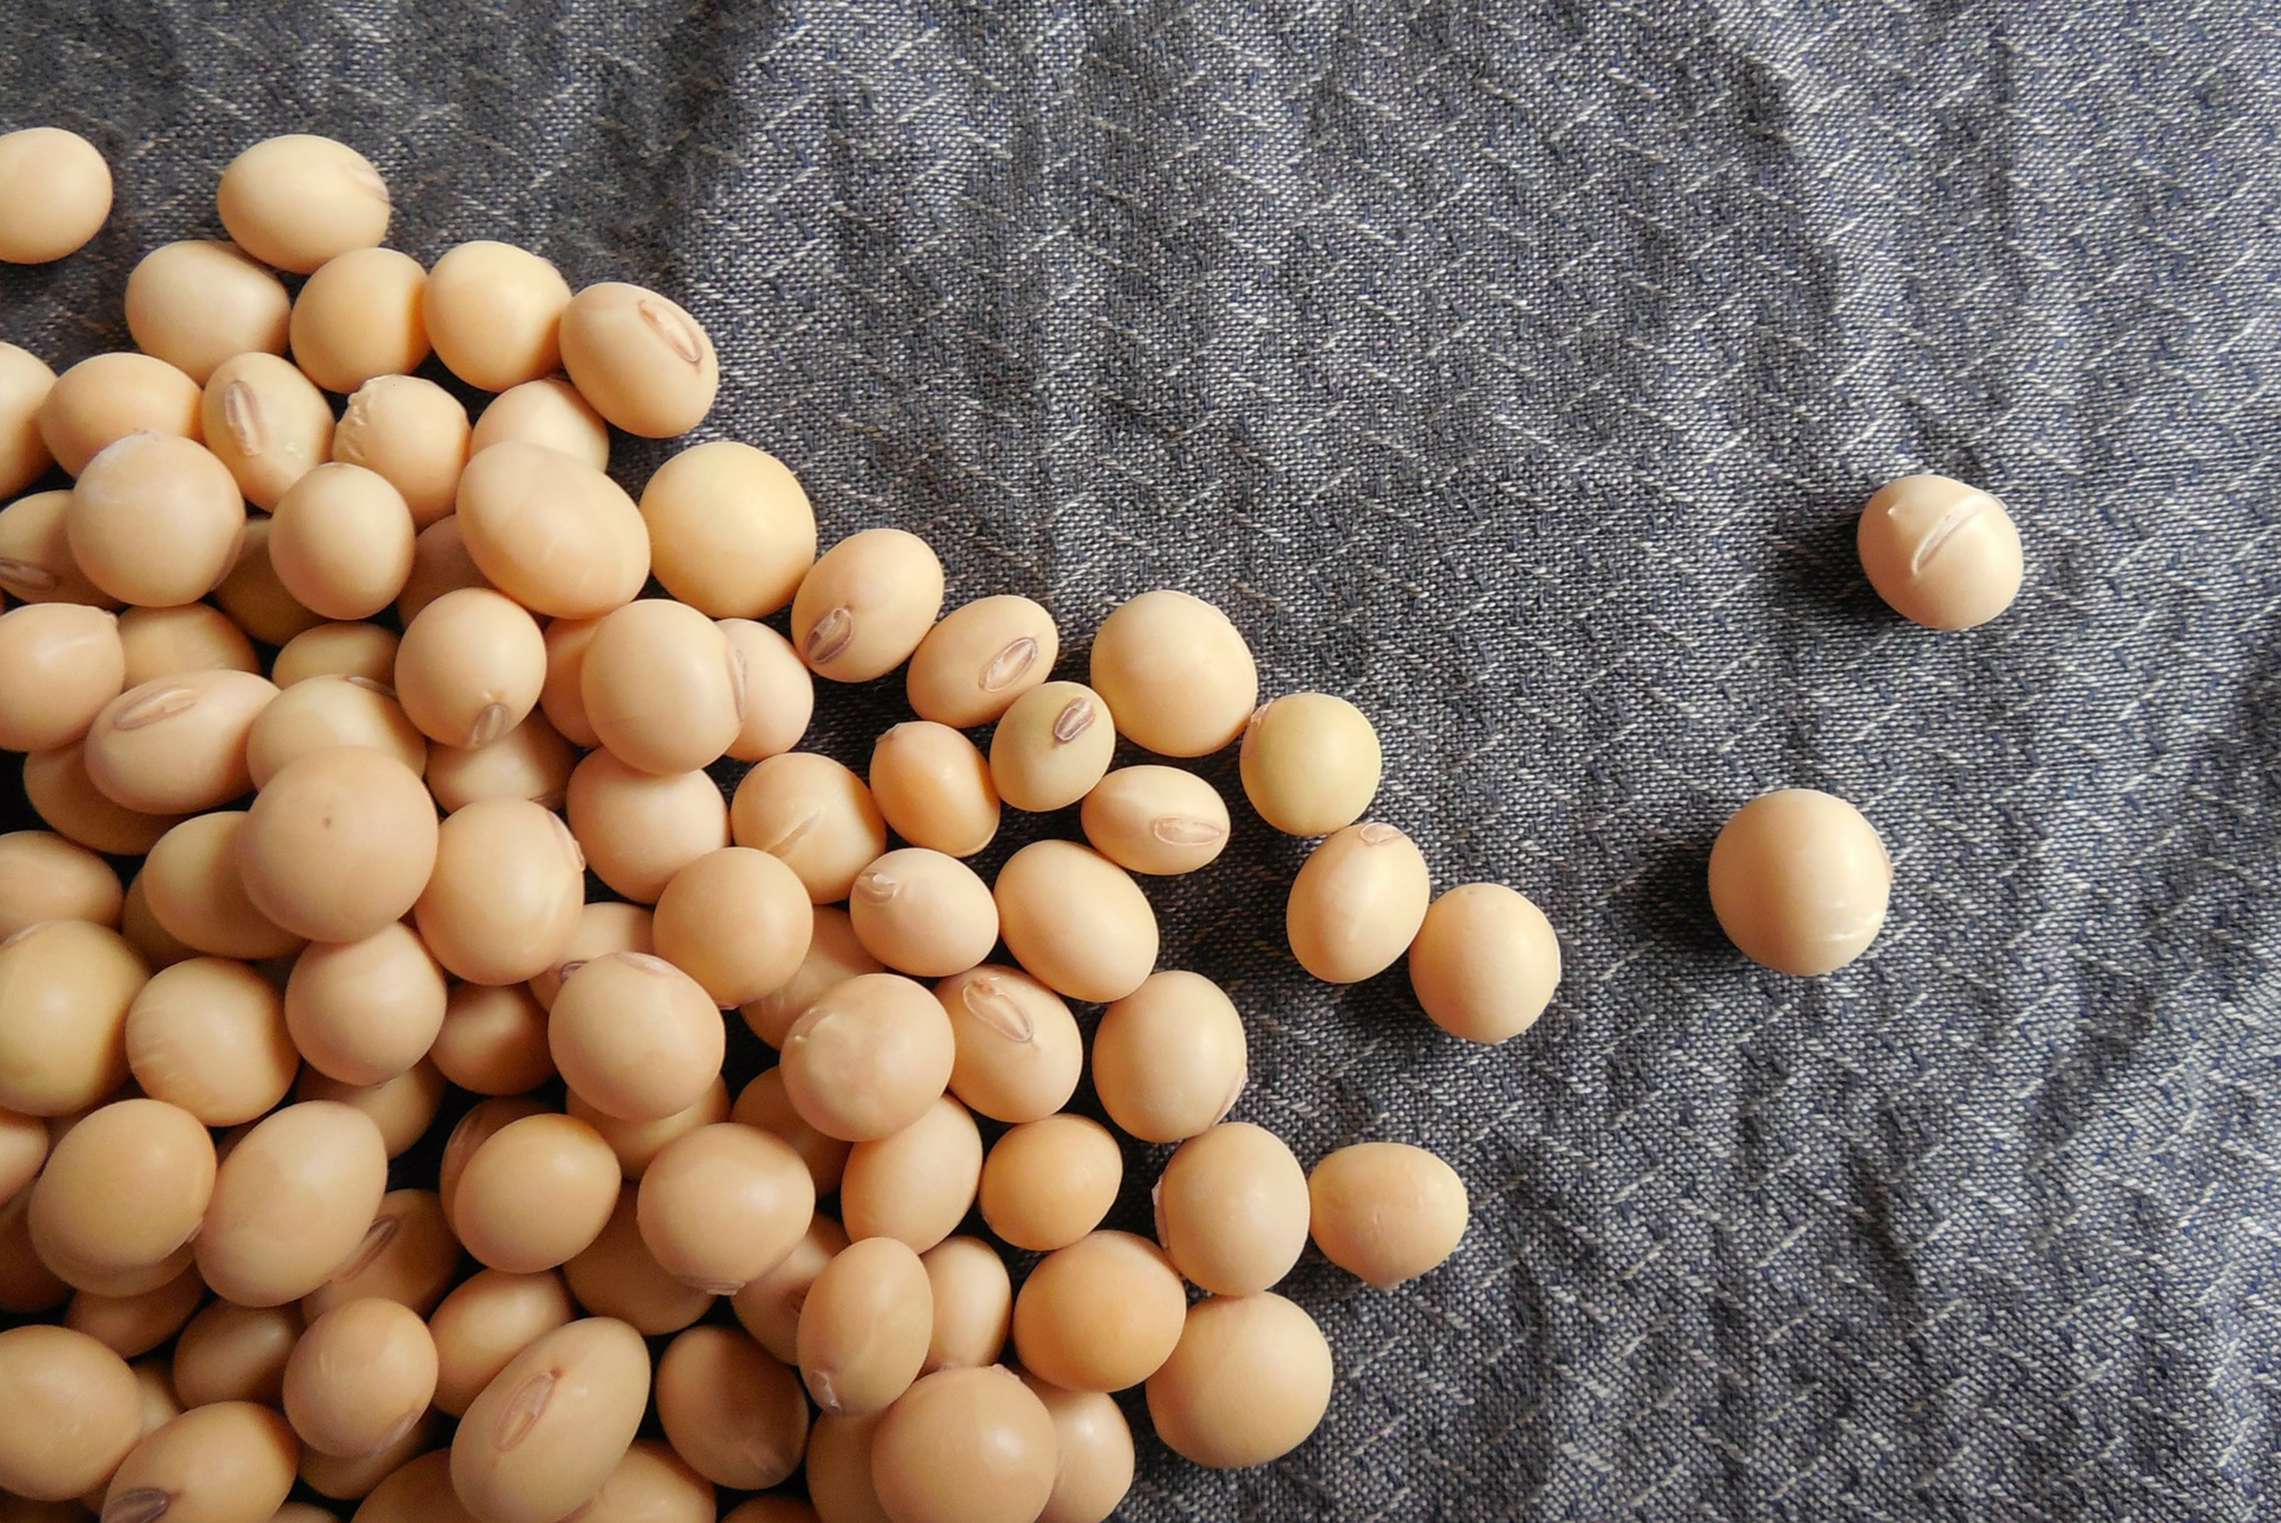 Why choosing Soy protein as your food ingredients